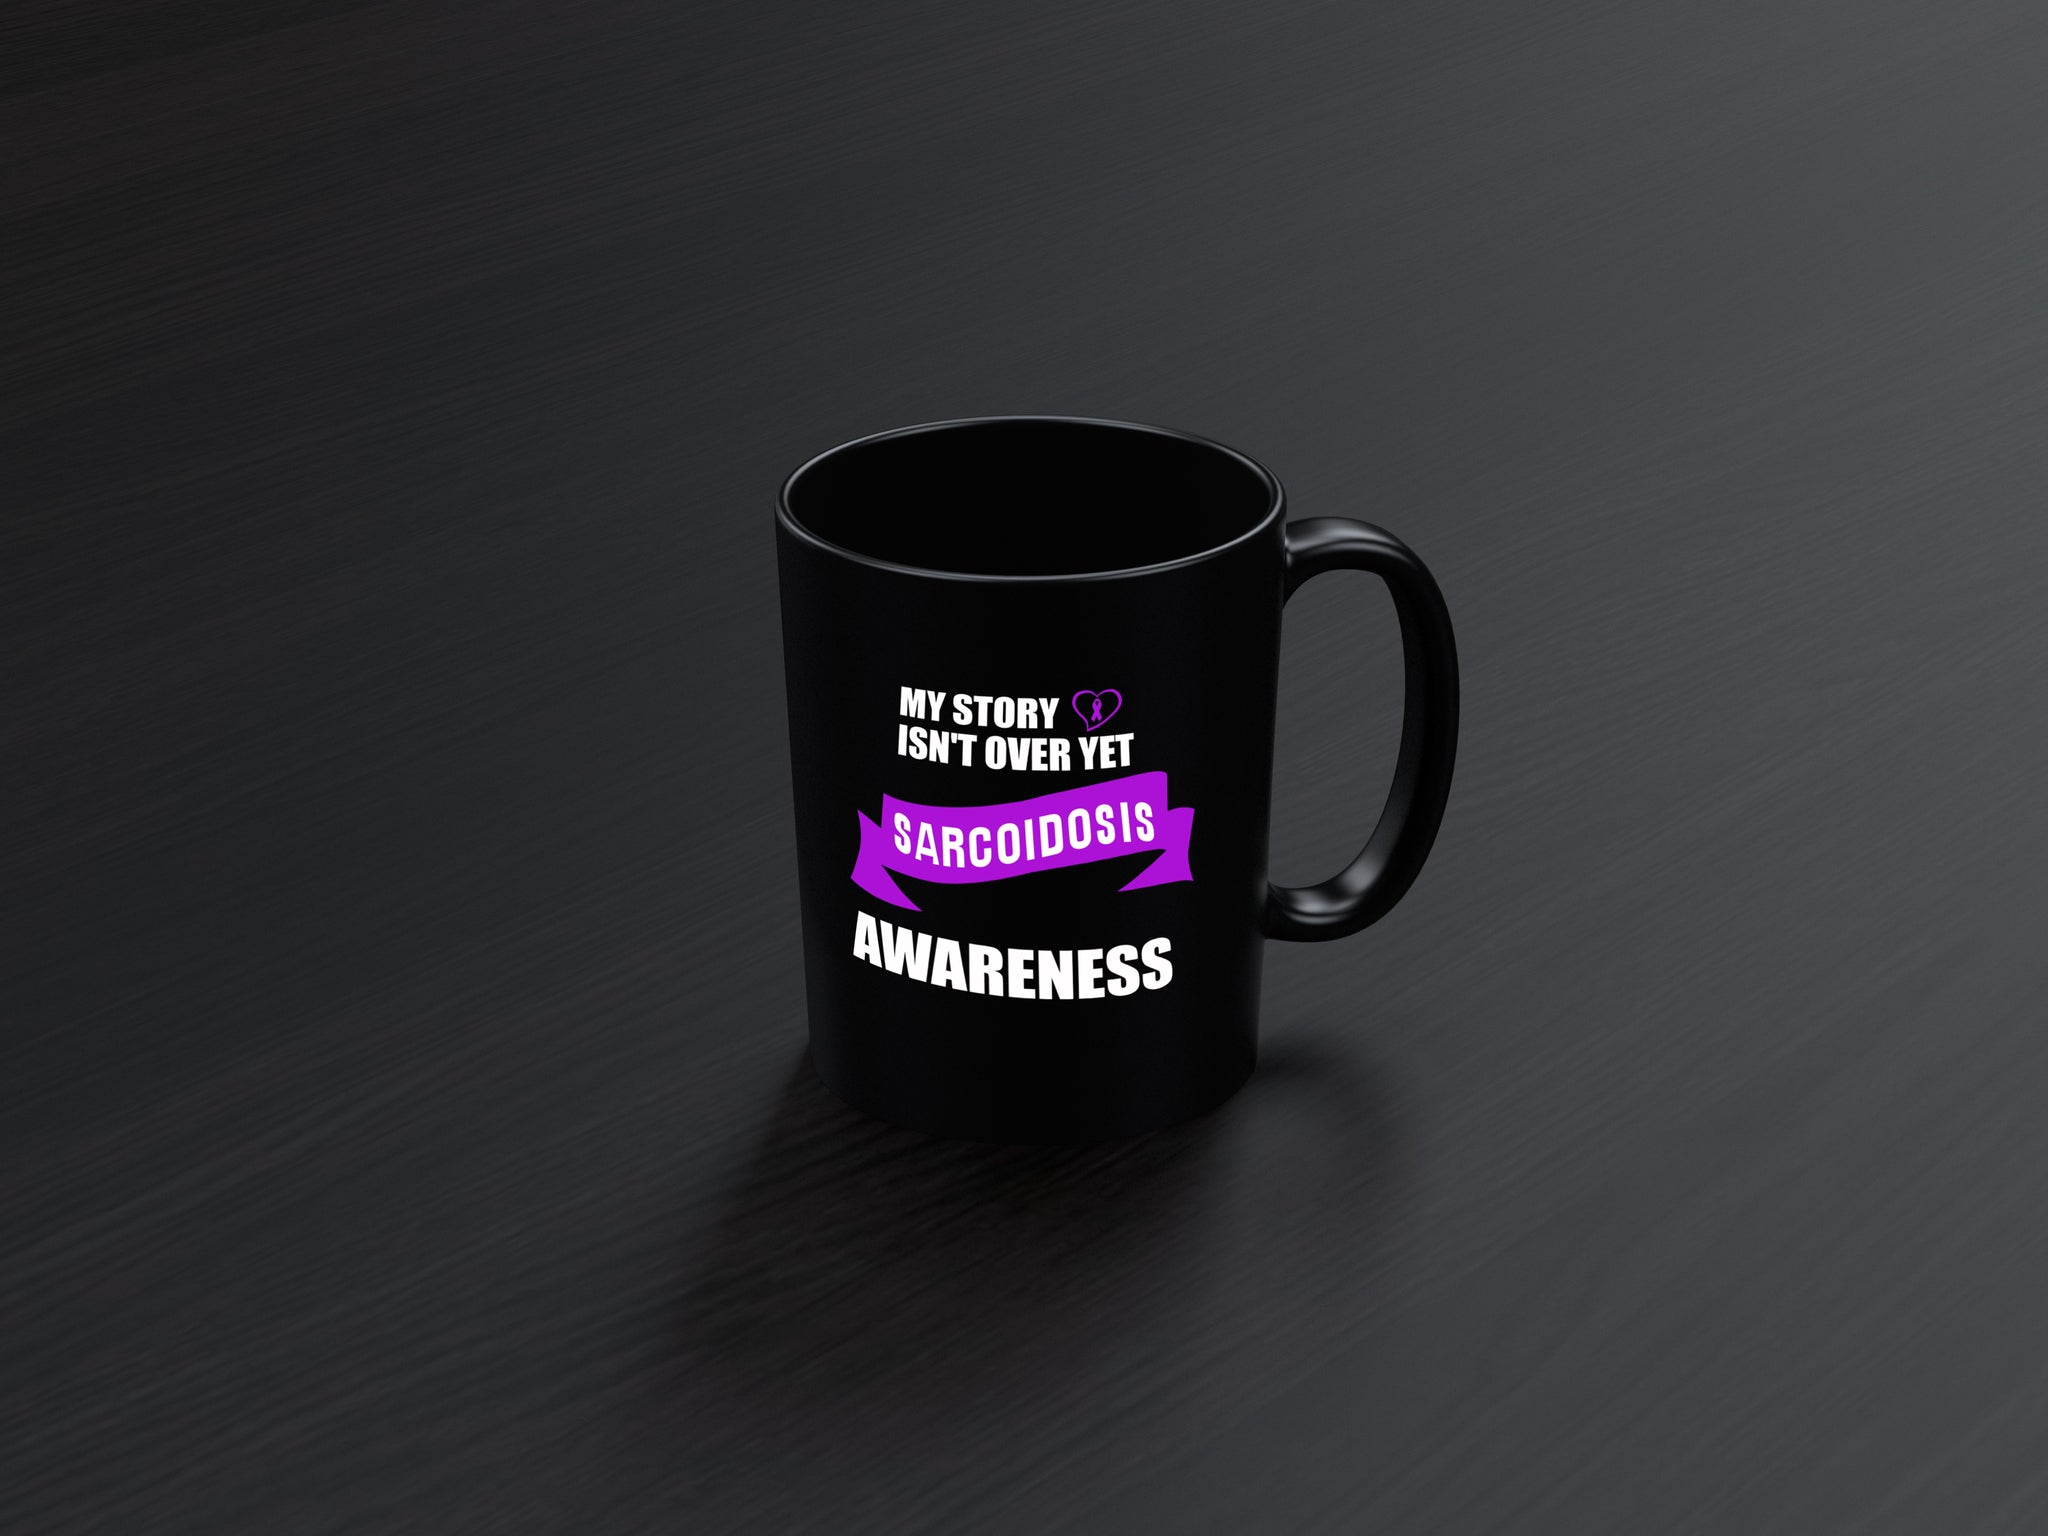 Skitongifts Funny Ceramic Coffee Mug For Birthday, Mother's Day, Father's Day, Christmas My Story Isn't Over Yet Sarcoidosis Awareness